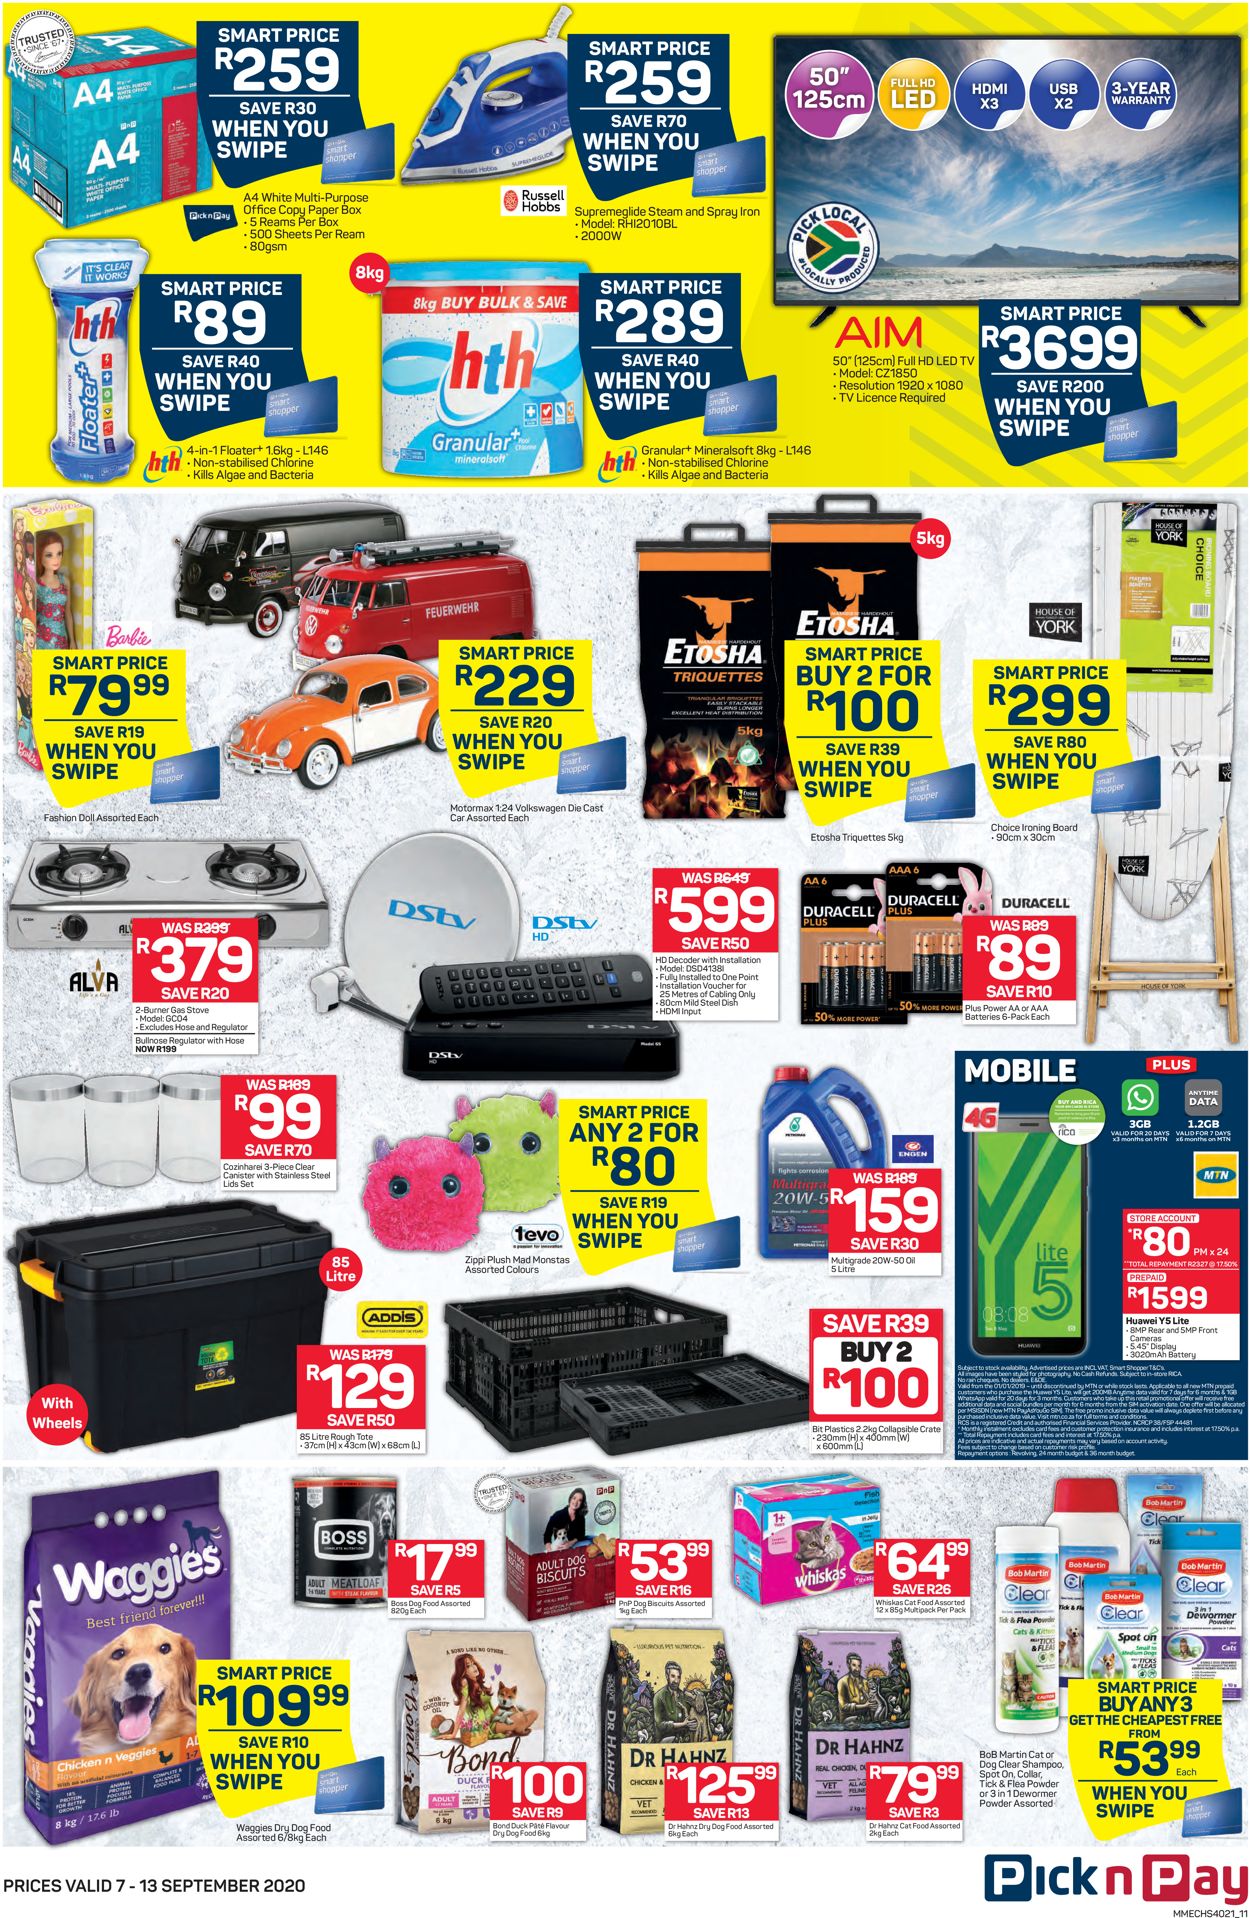 Pick n Pay Catalogue - 2020/09/07-2020/09/13 (Page 11)